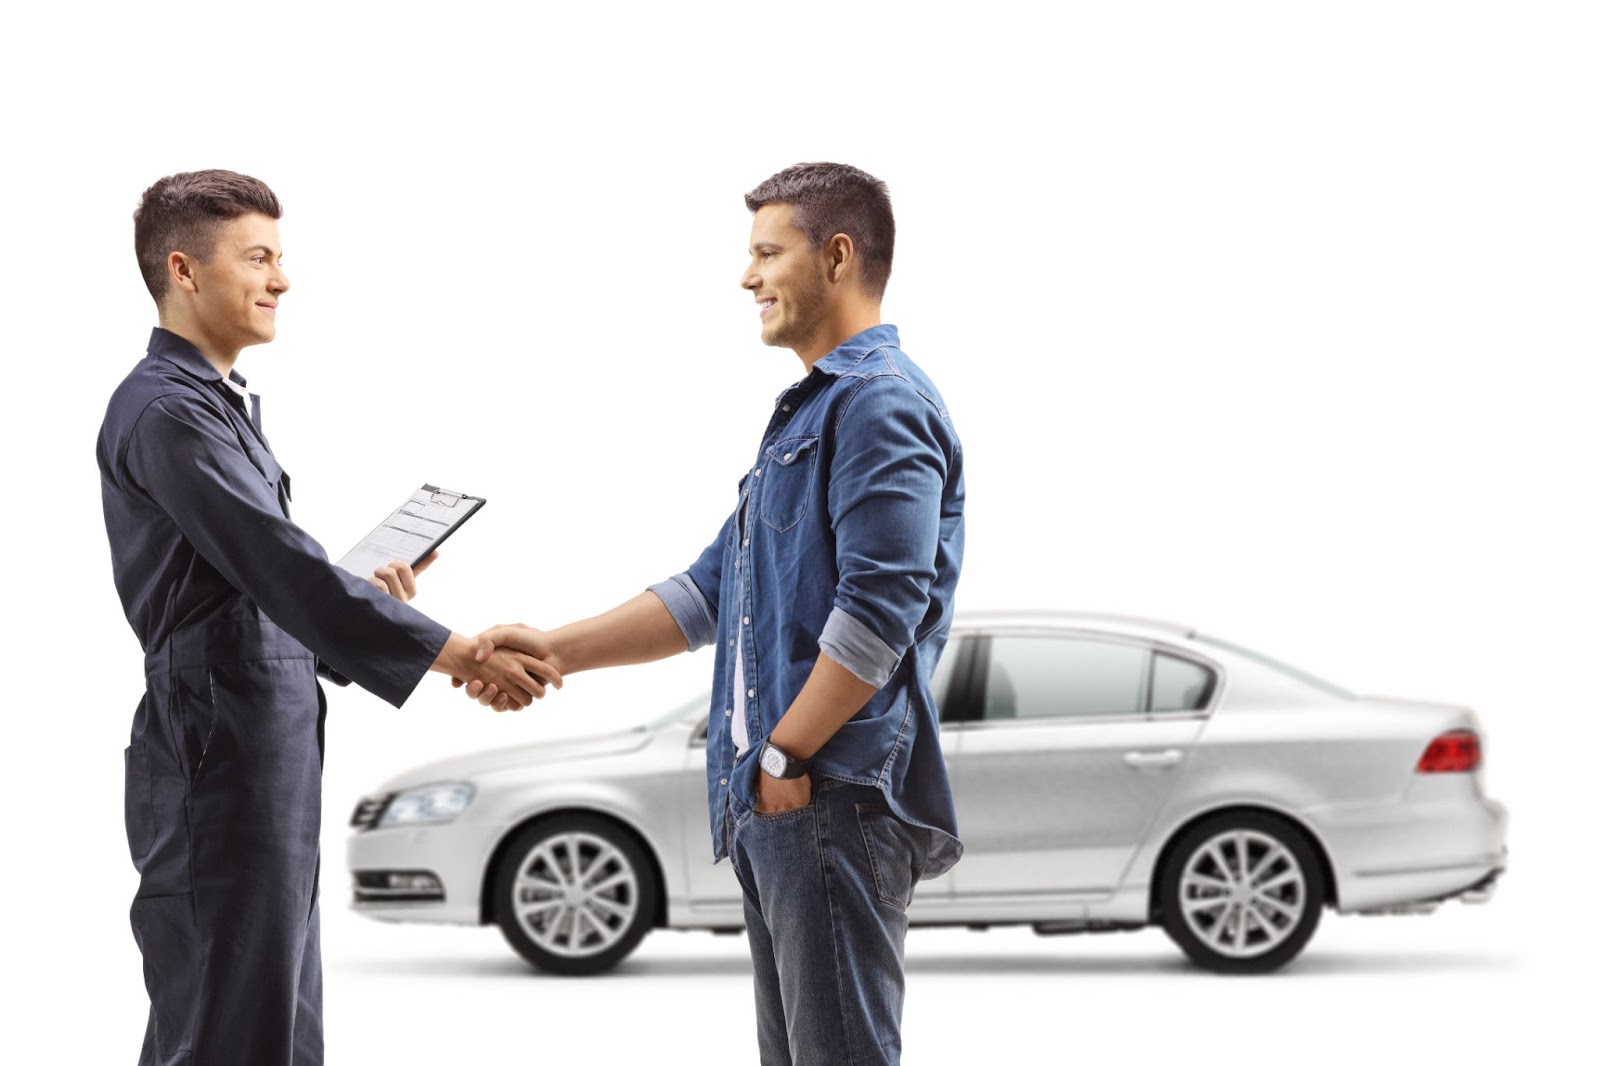 What Is A Direct Repair Vendor & How Can That Help Me?